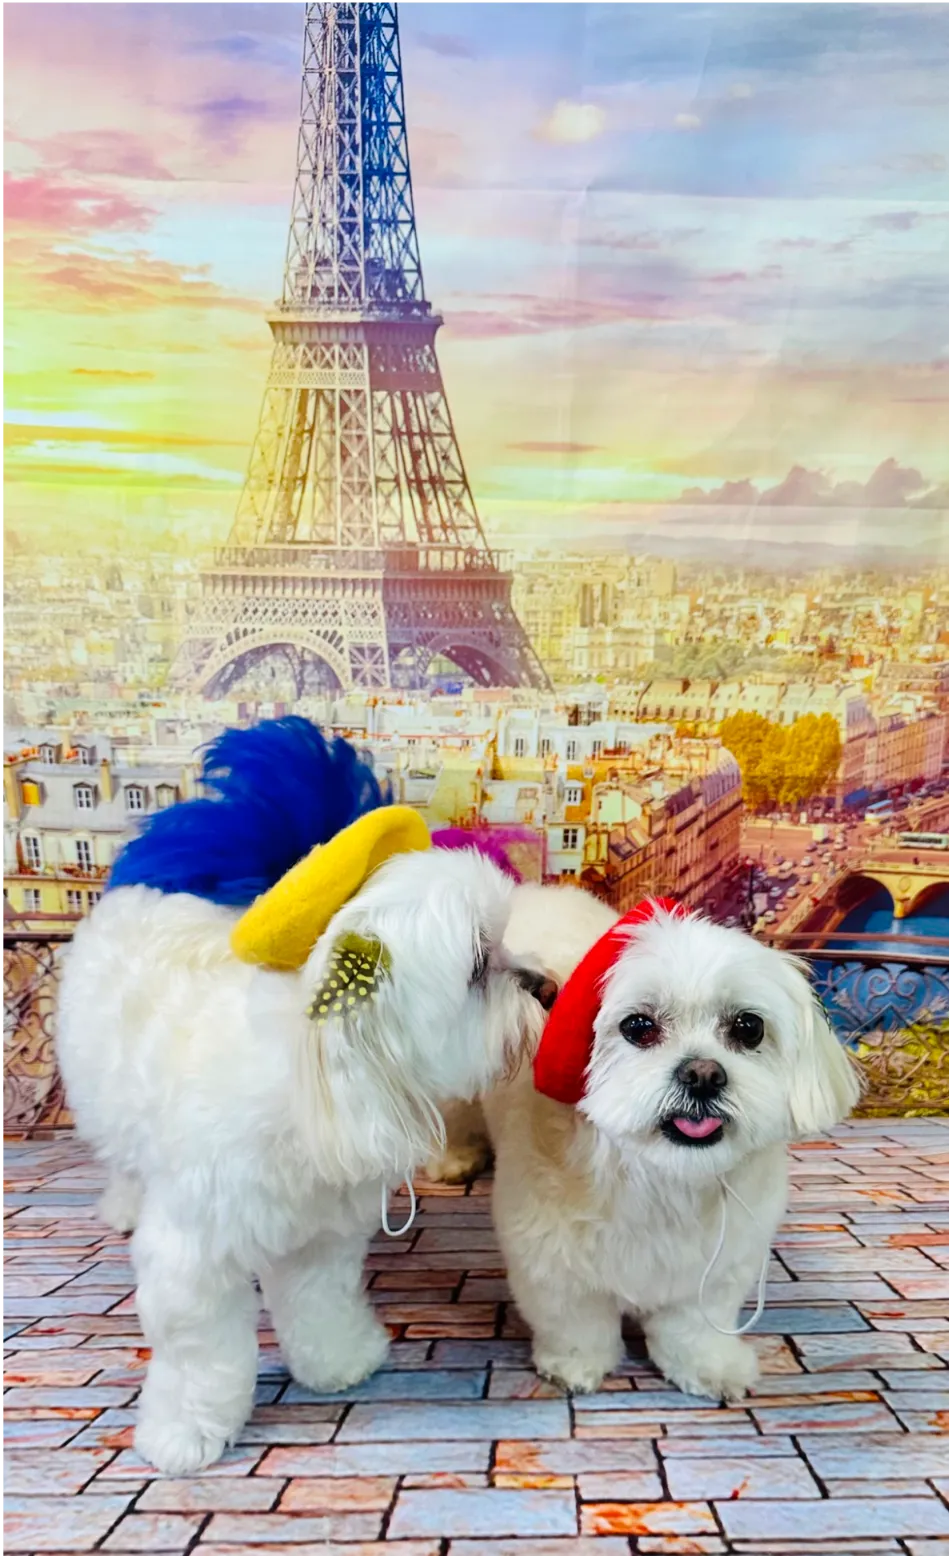 Two Maltese dogs in a Paris-themed photoshoot, one wearing a blue beret and the other wearing a red beret, with the Eiffel Tower backdrop.